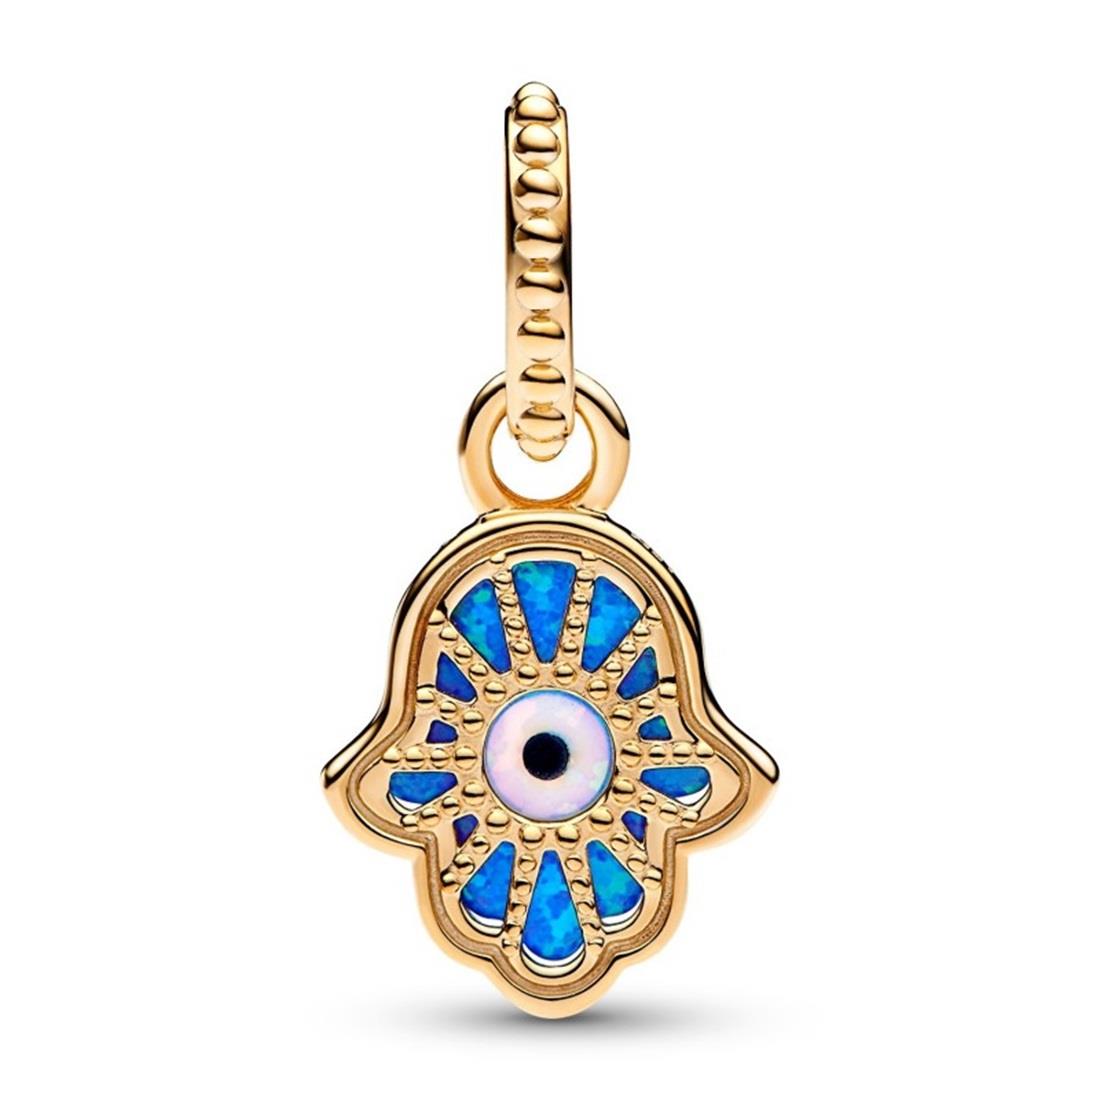 Hand of Fatima Blue Opal pendant charm in gold-plated metal alloy - PANDORA